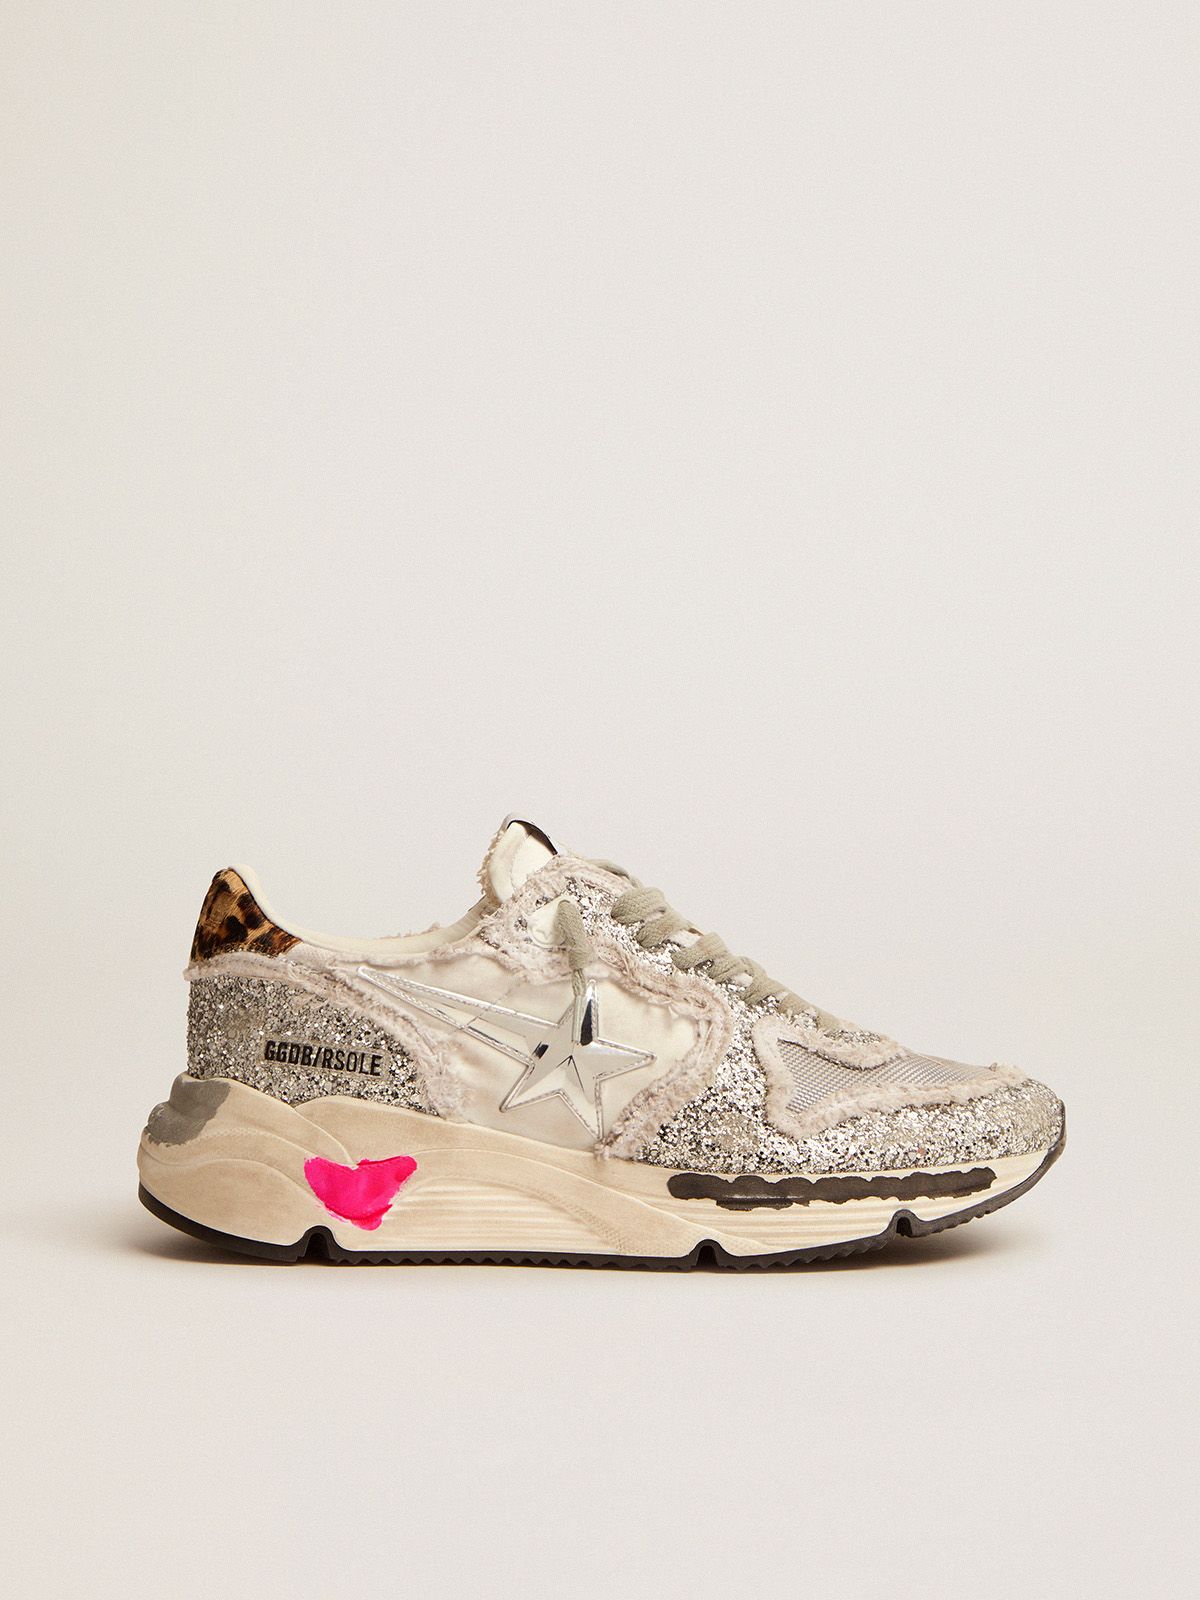 Golden Goose Ball Star Uomo Running Sole sneakers in nylon and silver glitter with leopard-print pony skin heel tab